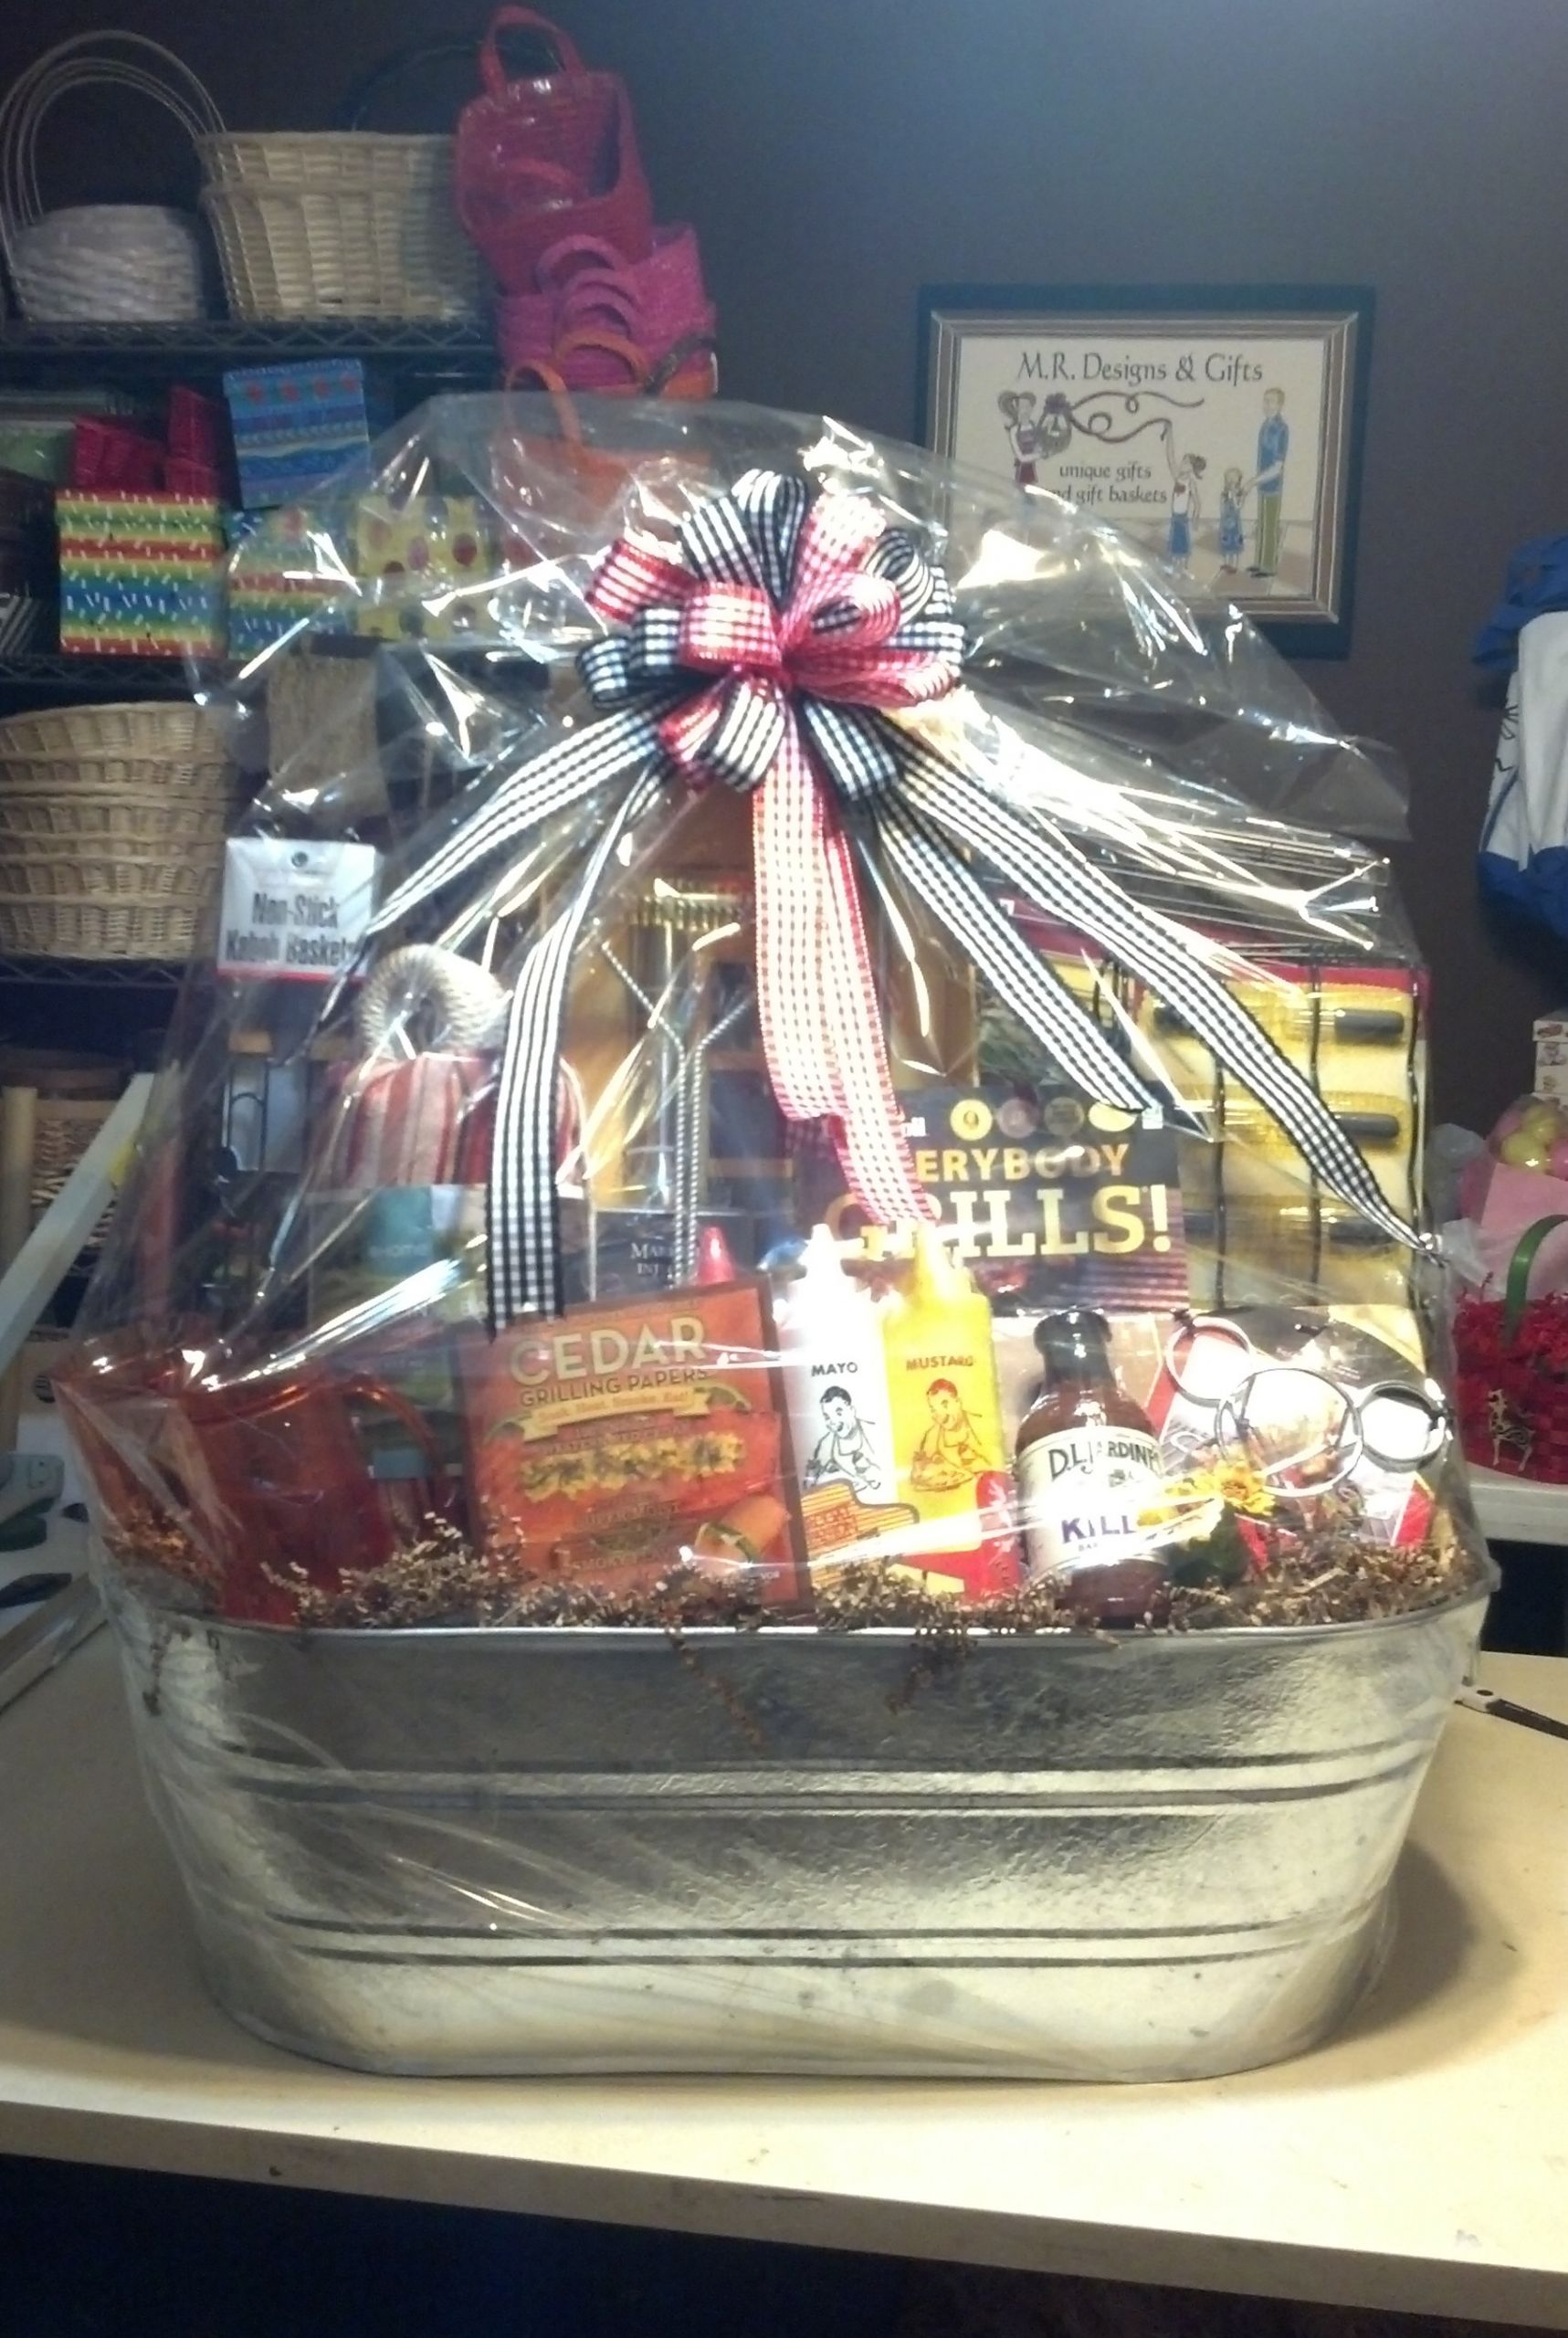 Gift Basket Ideas For Fundraising
 Special Event and Silent Auction Gift Basket Ideas by M R